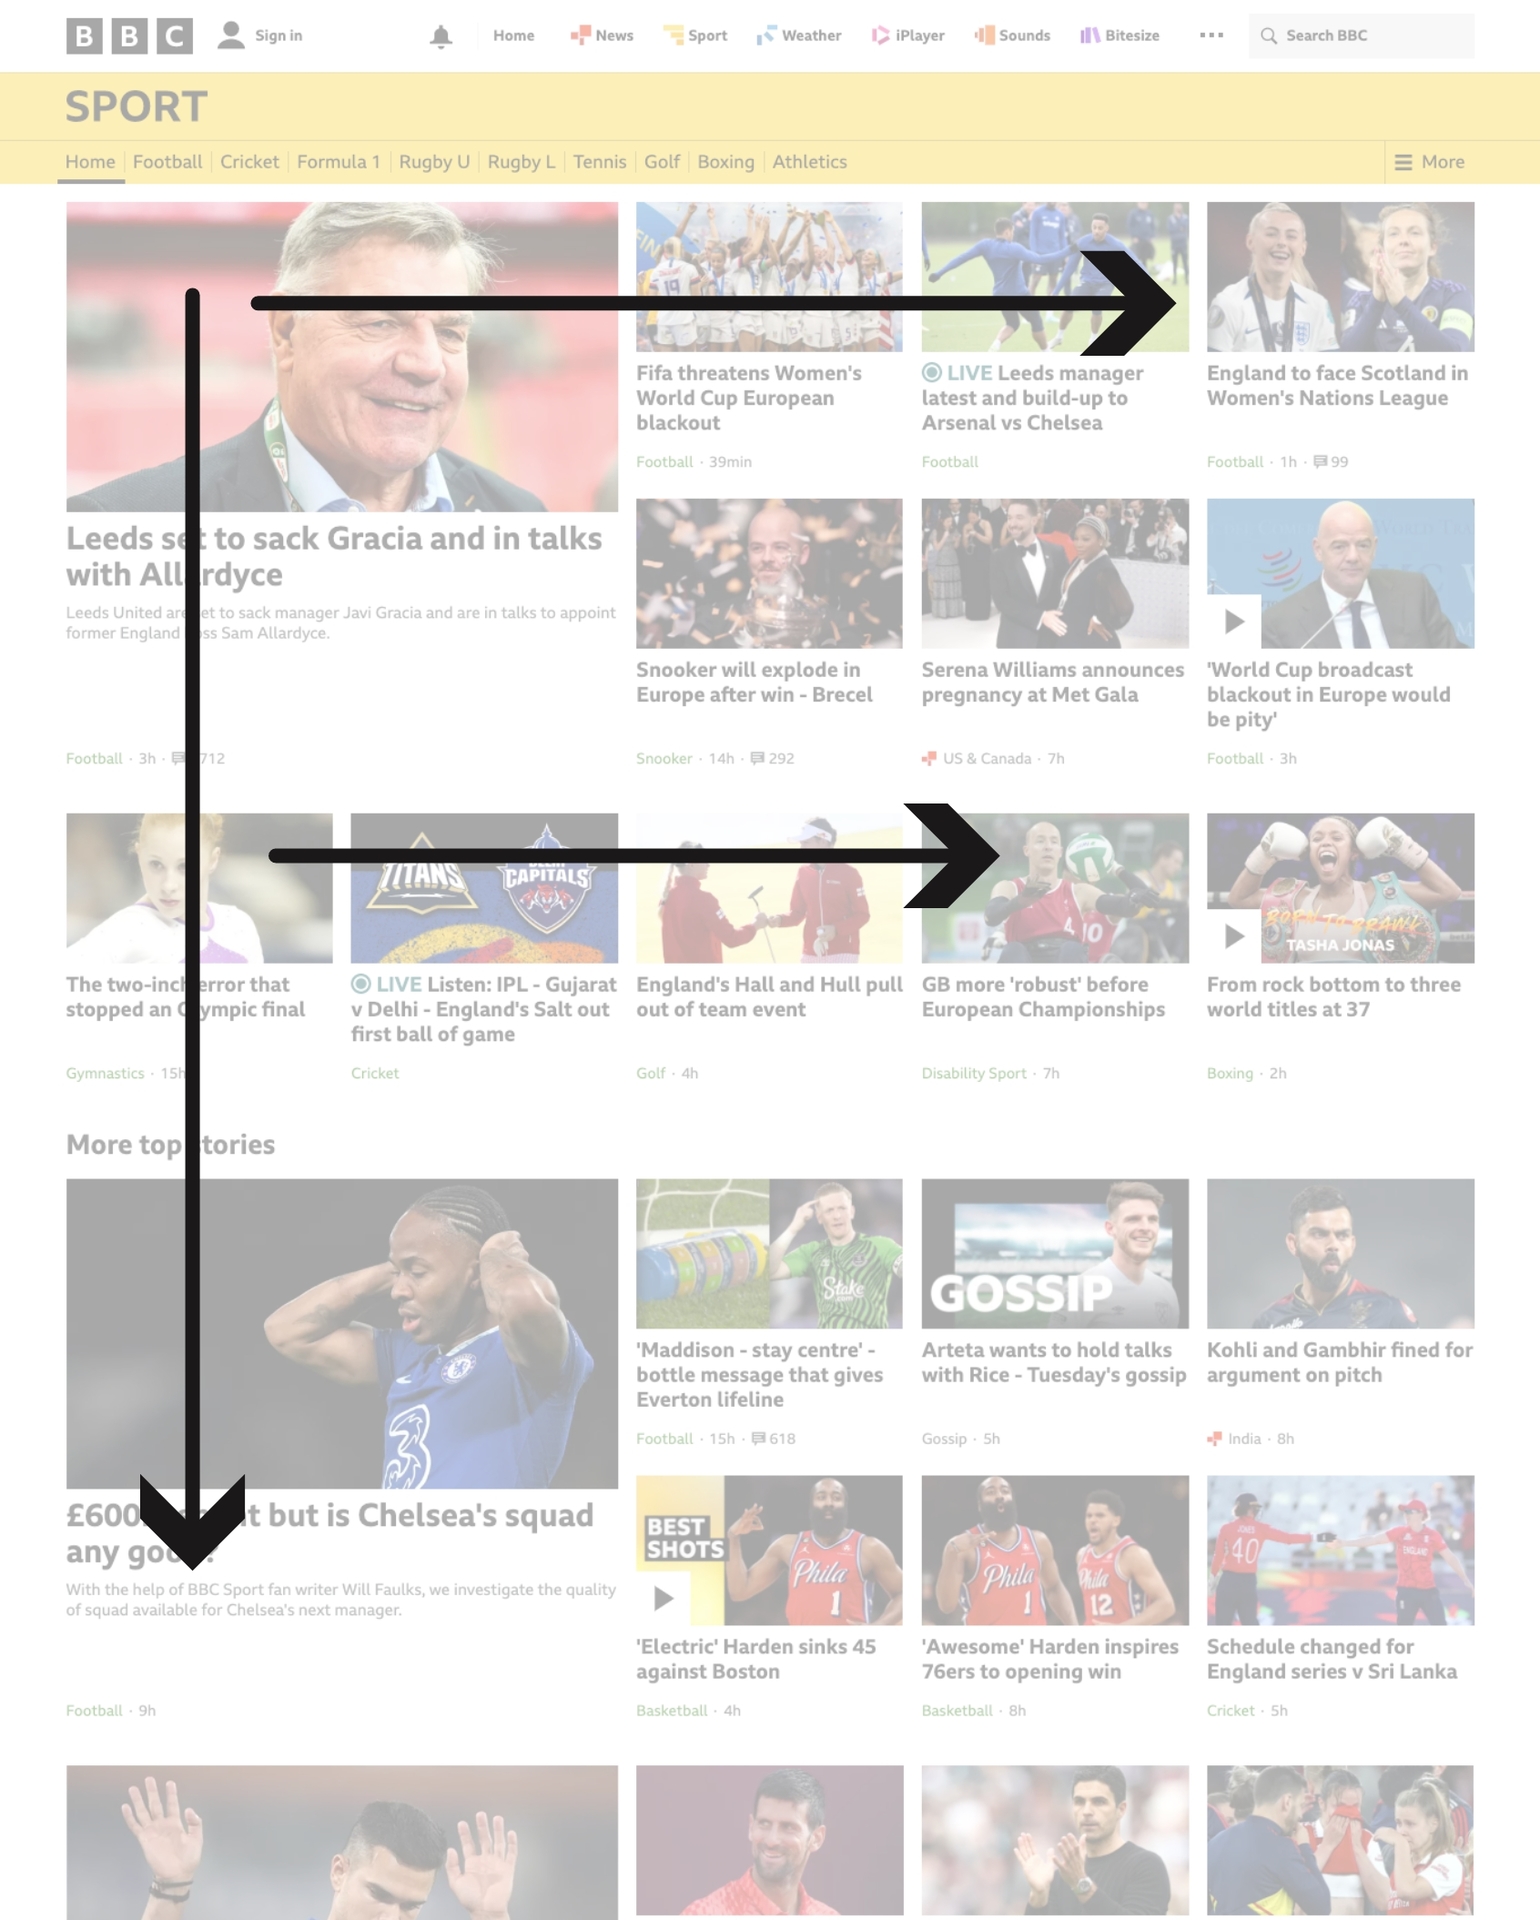 BBC sport website's home page with arrows pointing to important sections